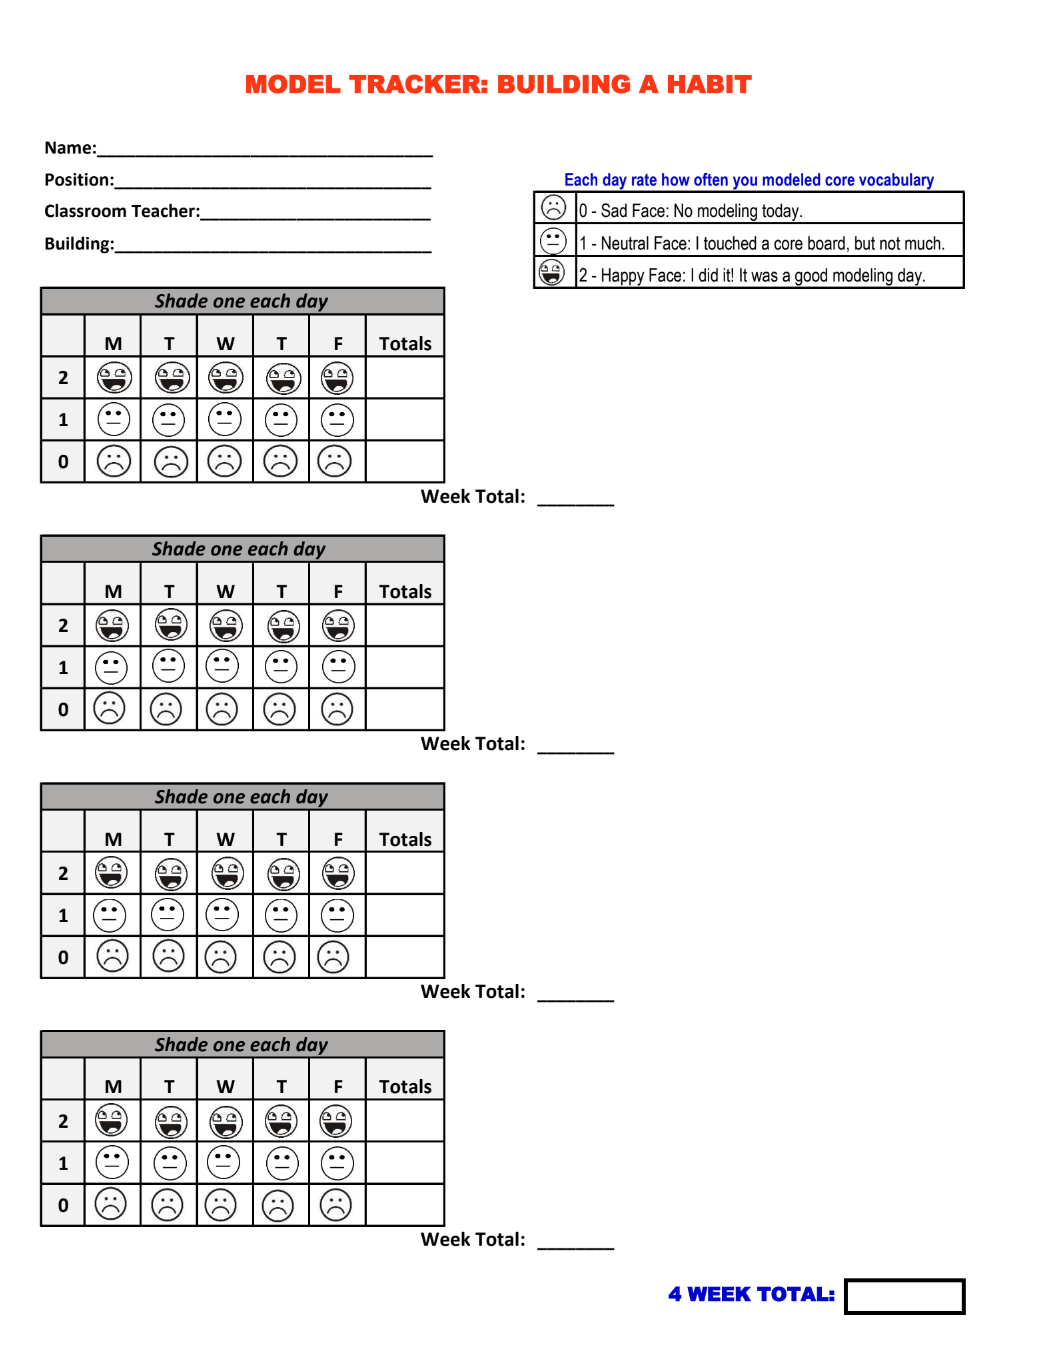 Organized form with ability to track one's effort with modeling AAC by rating each day with smiley face, neutral face, and sad face.